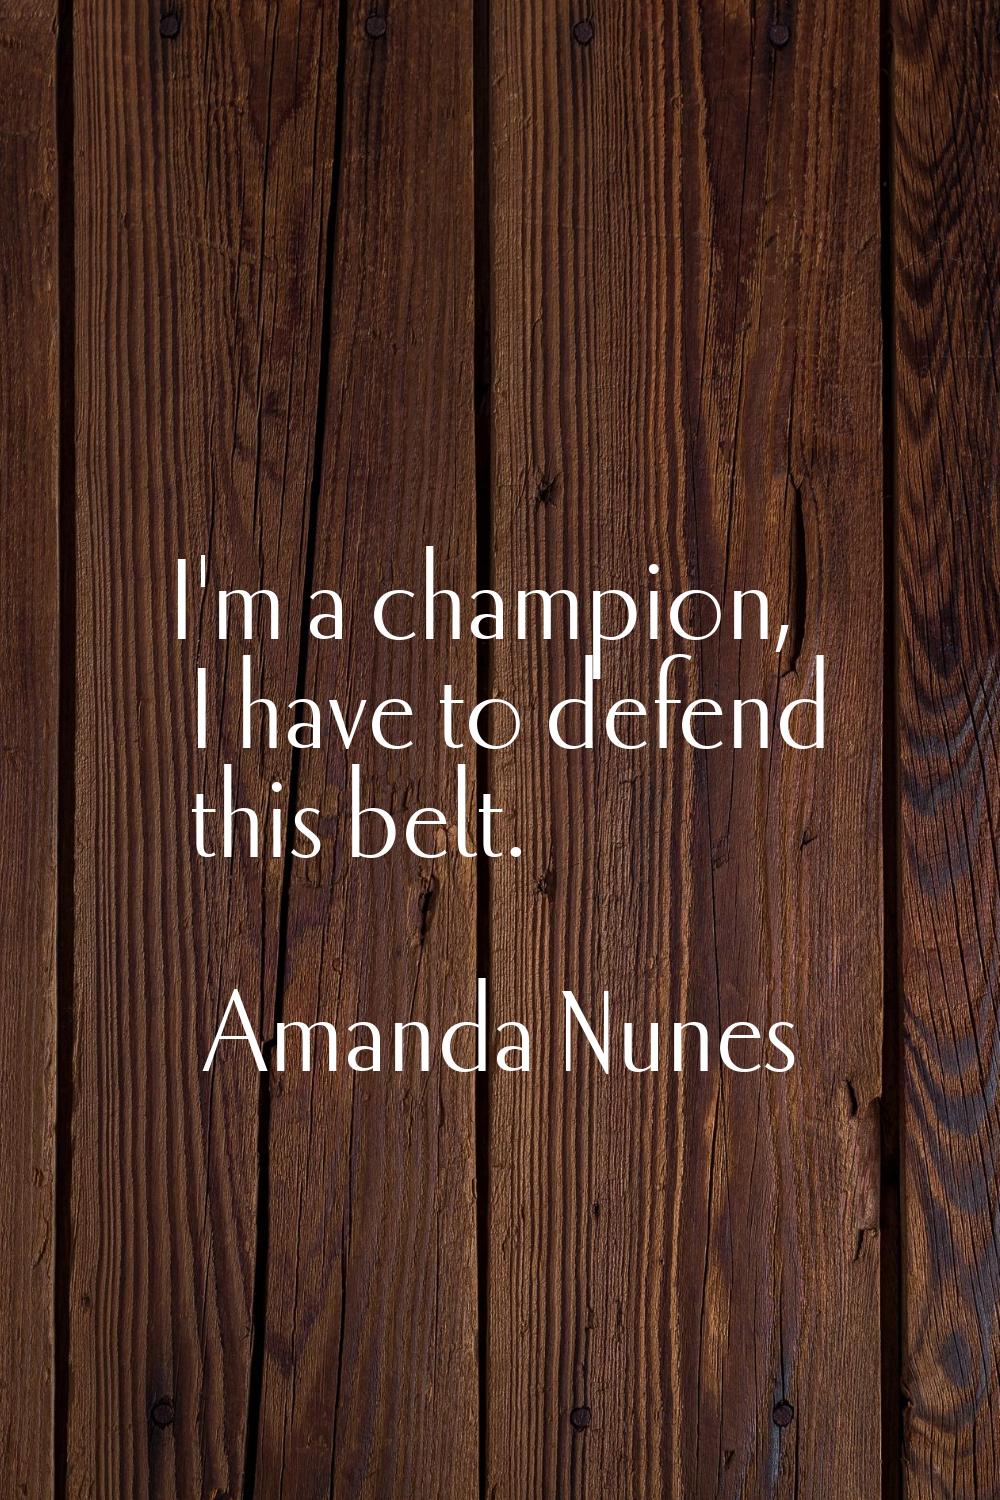 I'm a champion, I have to defend this belt.